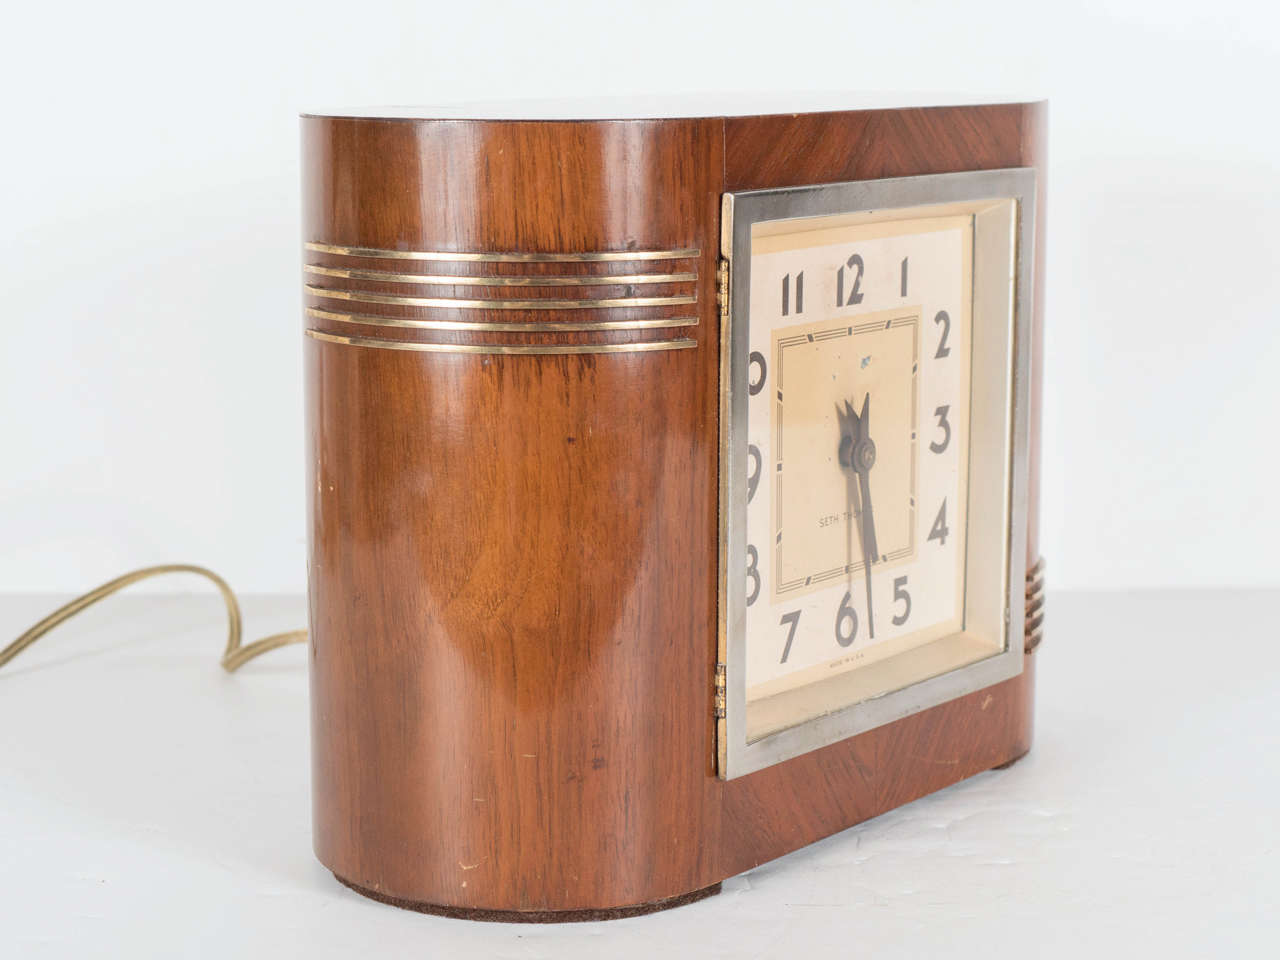 This exceptional Art Deco clock by Seth Thomas features a streamlined design with rounded ends decorated with a lineal brass inlay detailing at each end. The clock strikes on the hour (this feature can be disabled) and is electric. The case is all